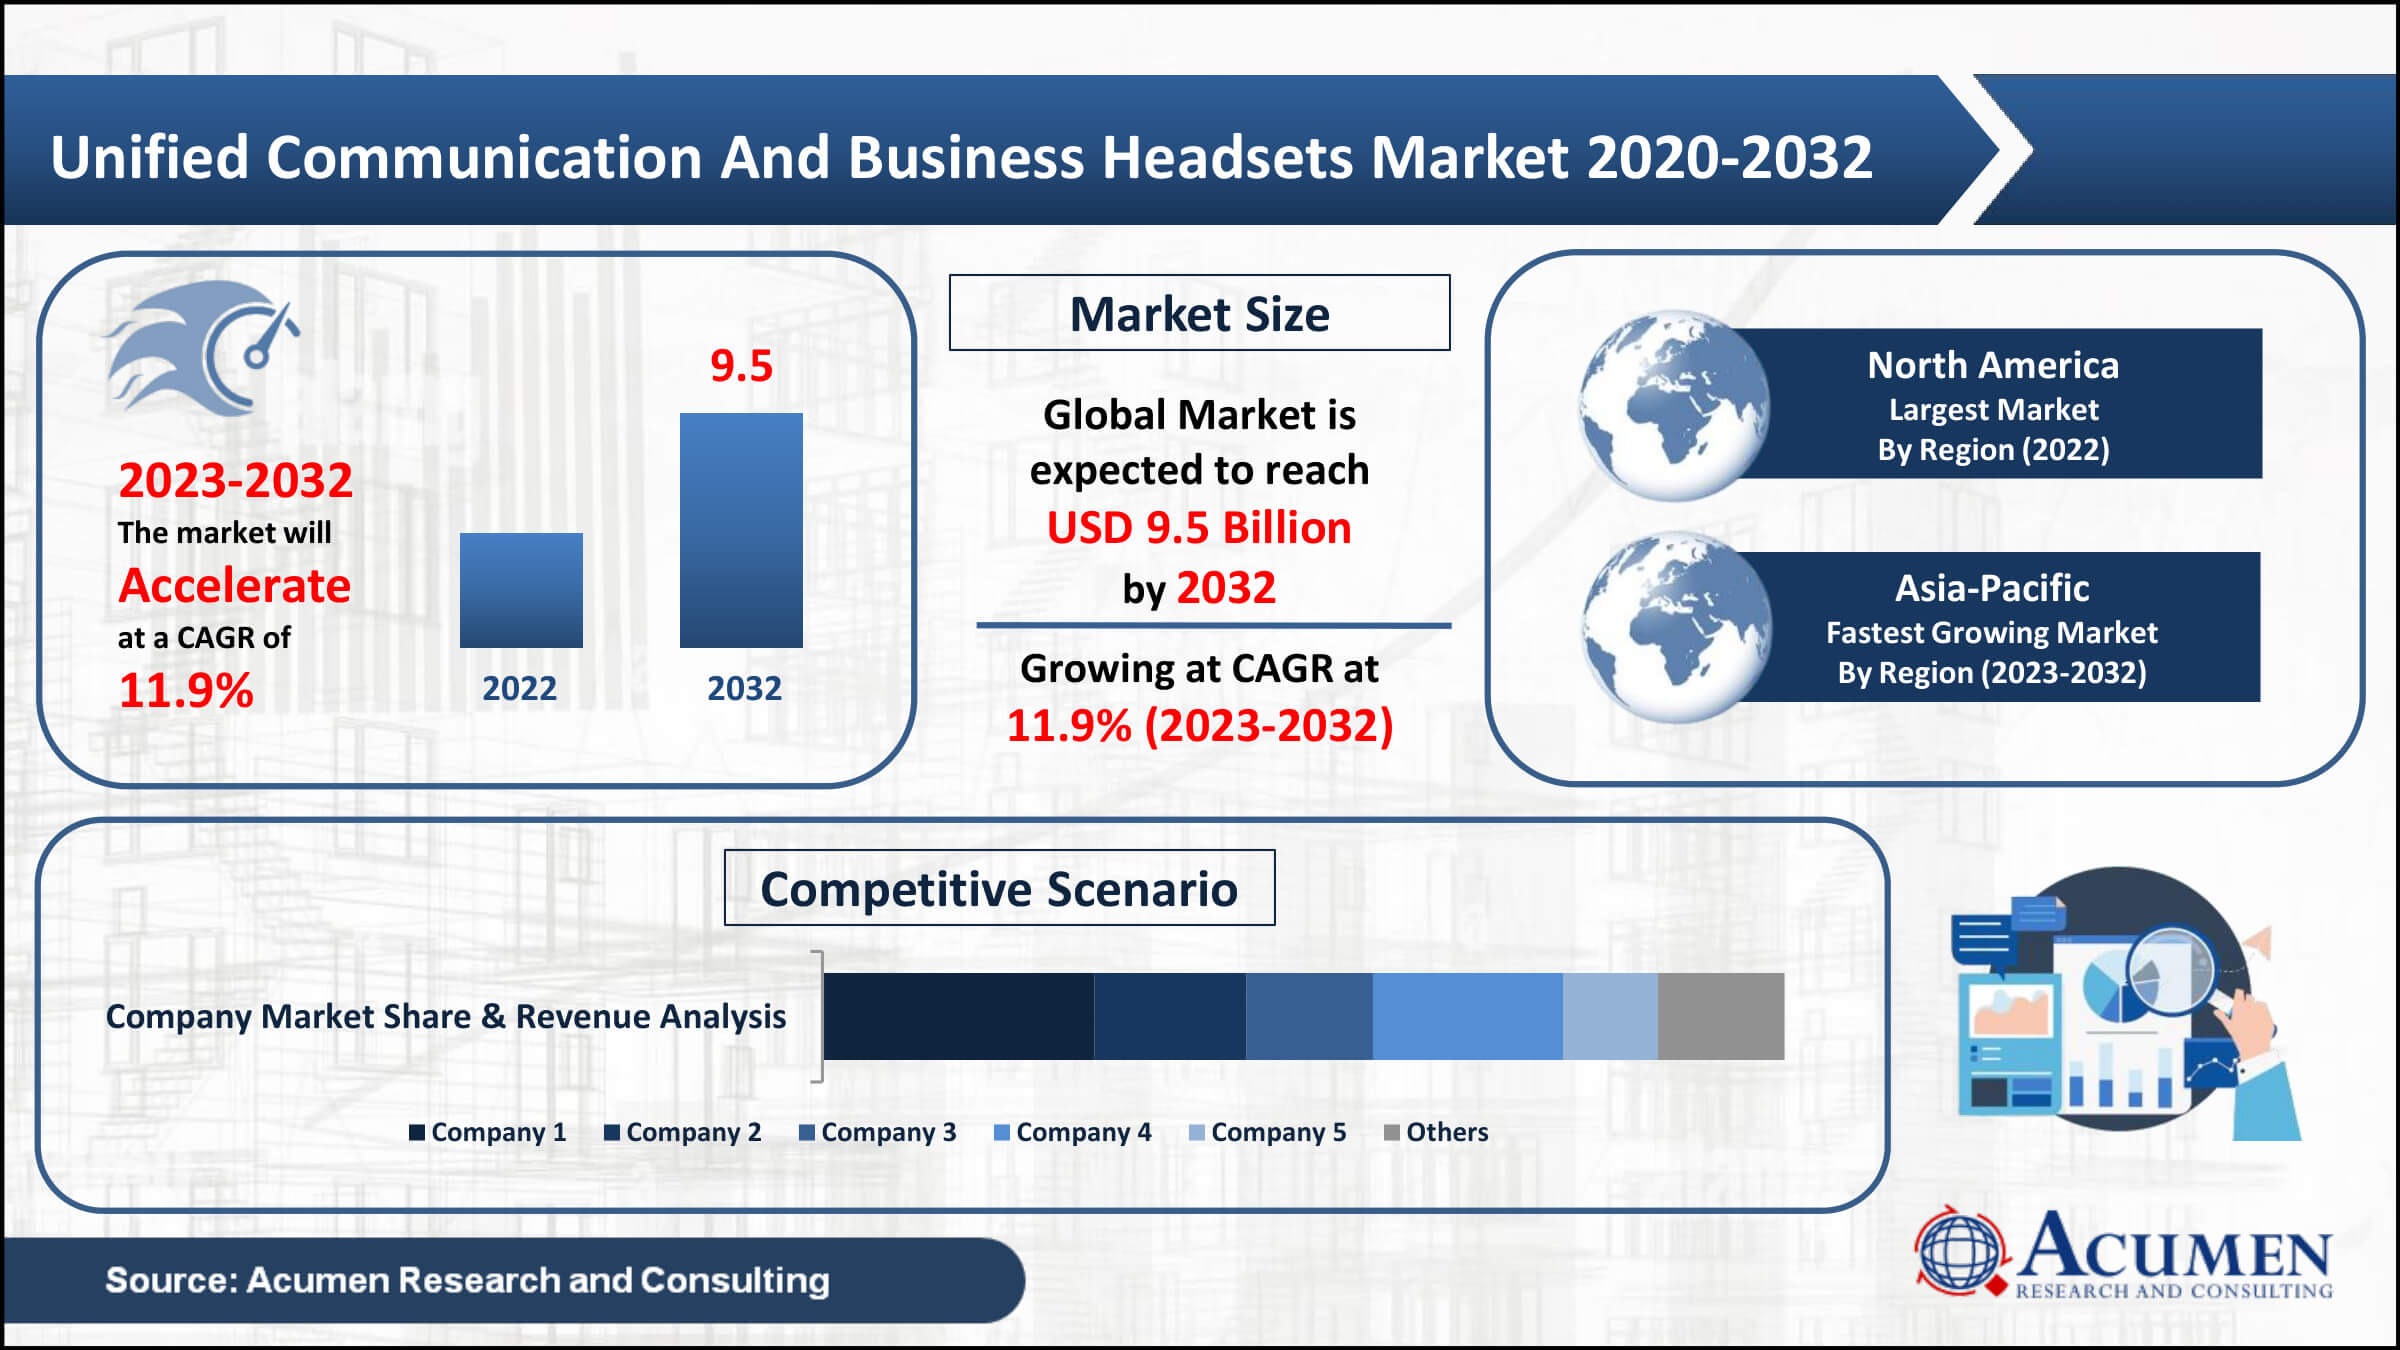 Unified Communication and Business Headsets Market Value